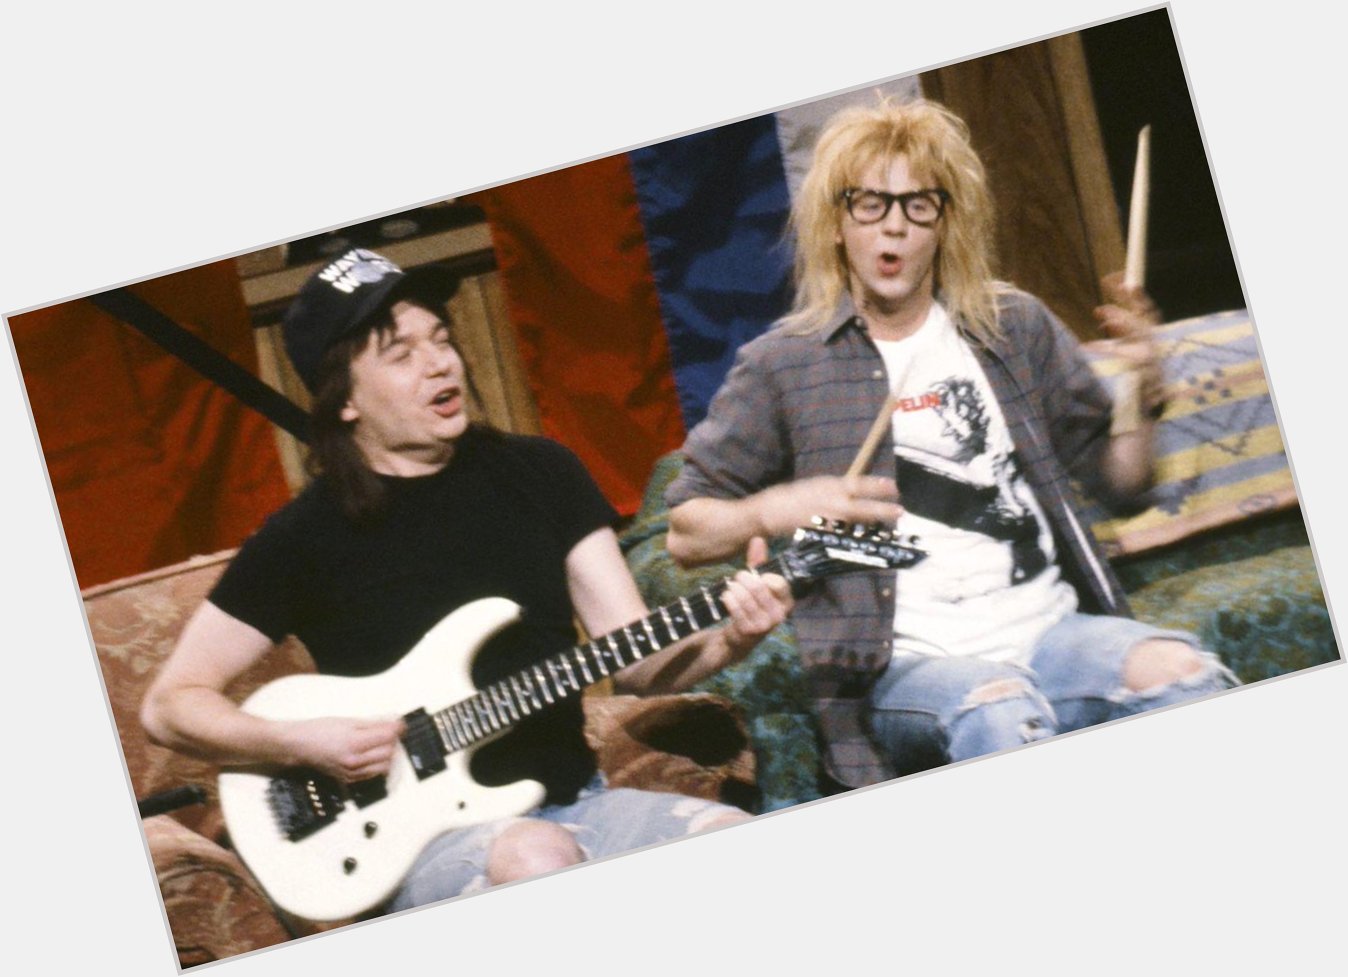 Happy birthday Mike Myers! Party with Wayne and Garth by revisiting our 1992 story on 